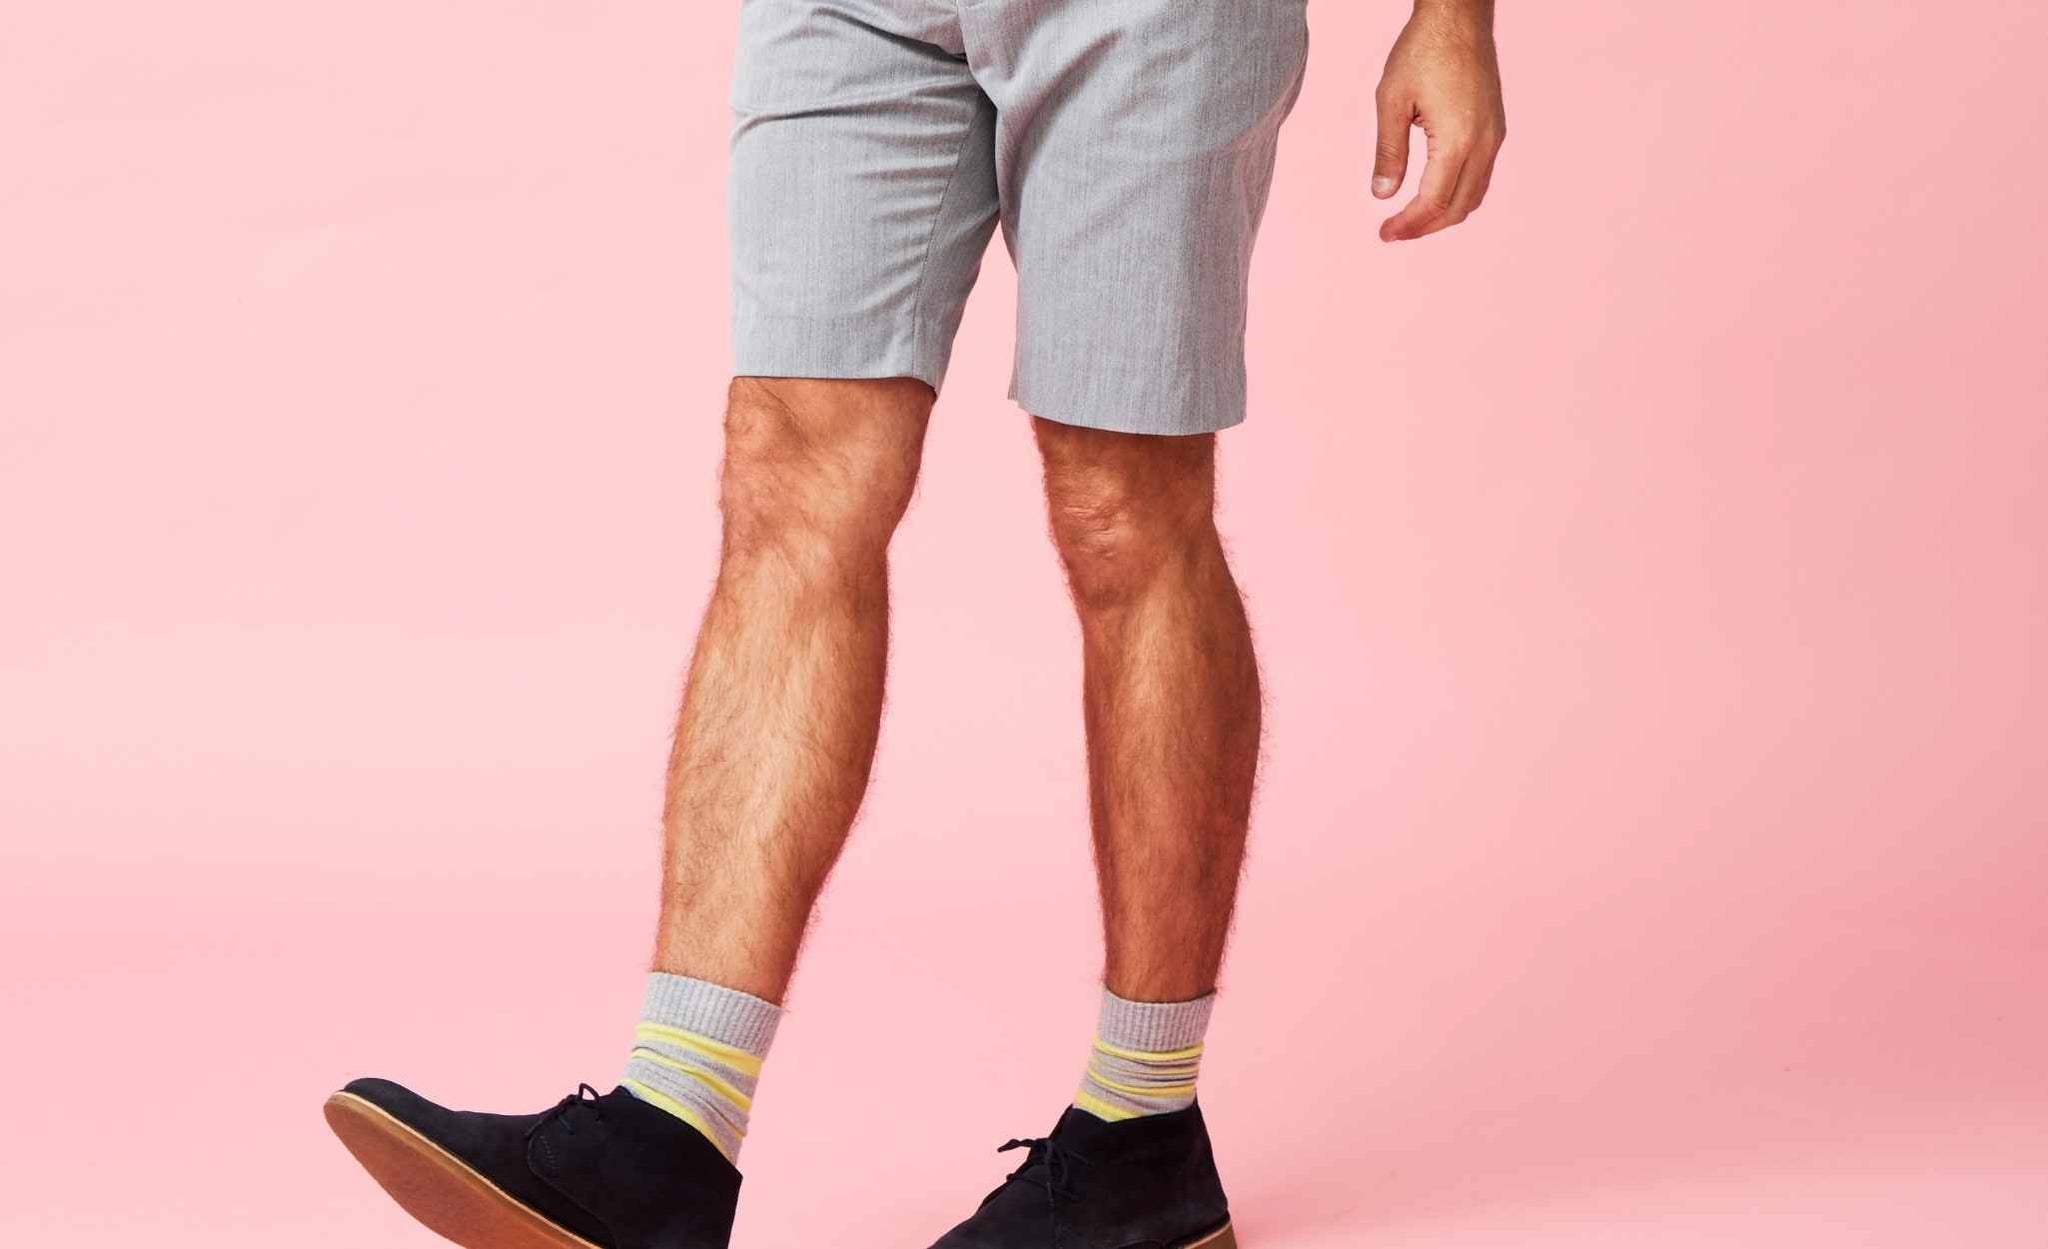 What type of socks You Should wear with shorts?